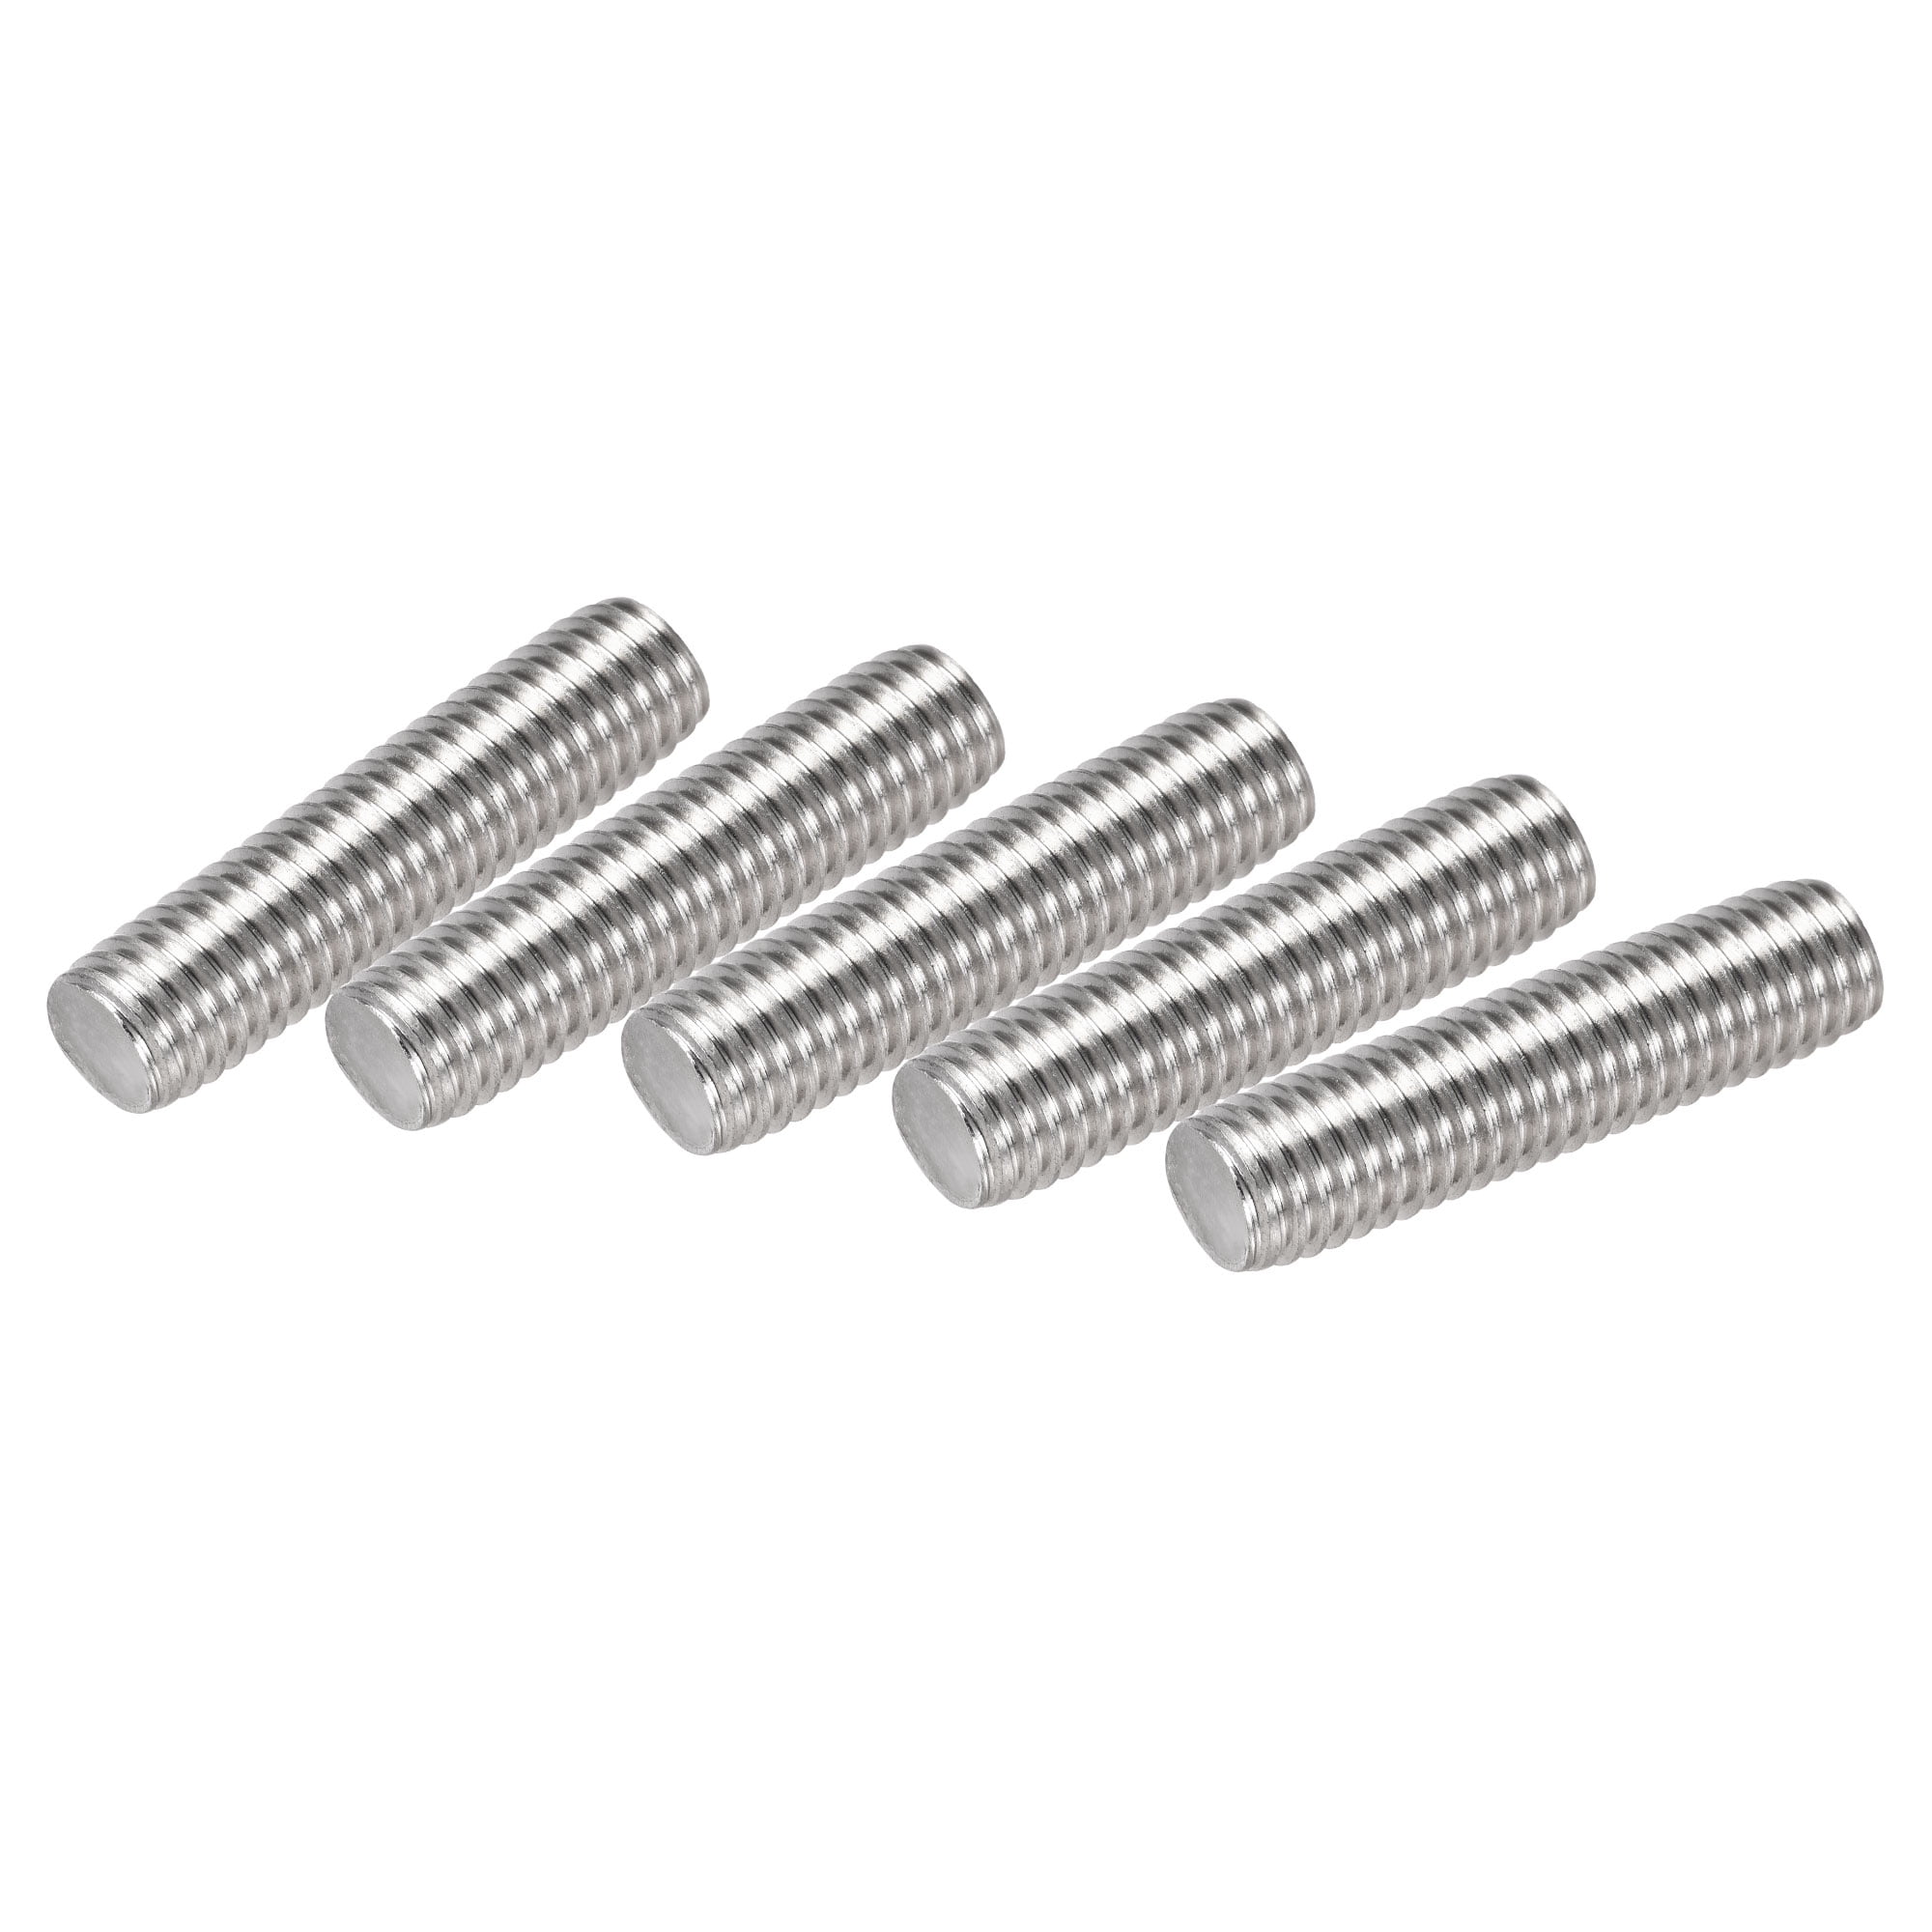 M4 x 140mm 304 Stainless Steel Fully Threaded Rod Bar Studs Silver Tone 5 Pcs 